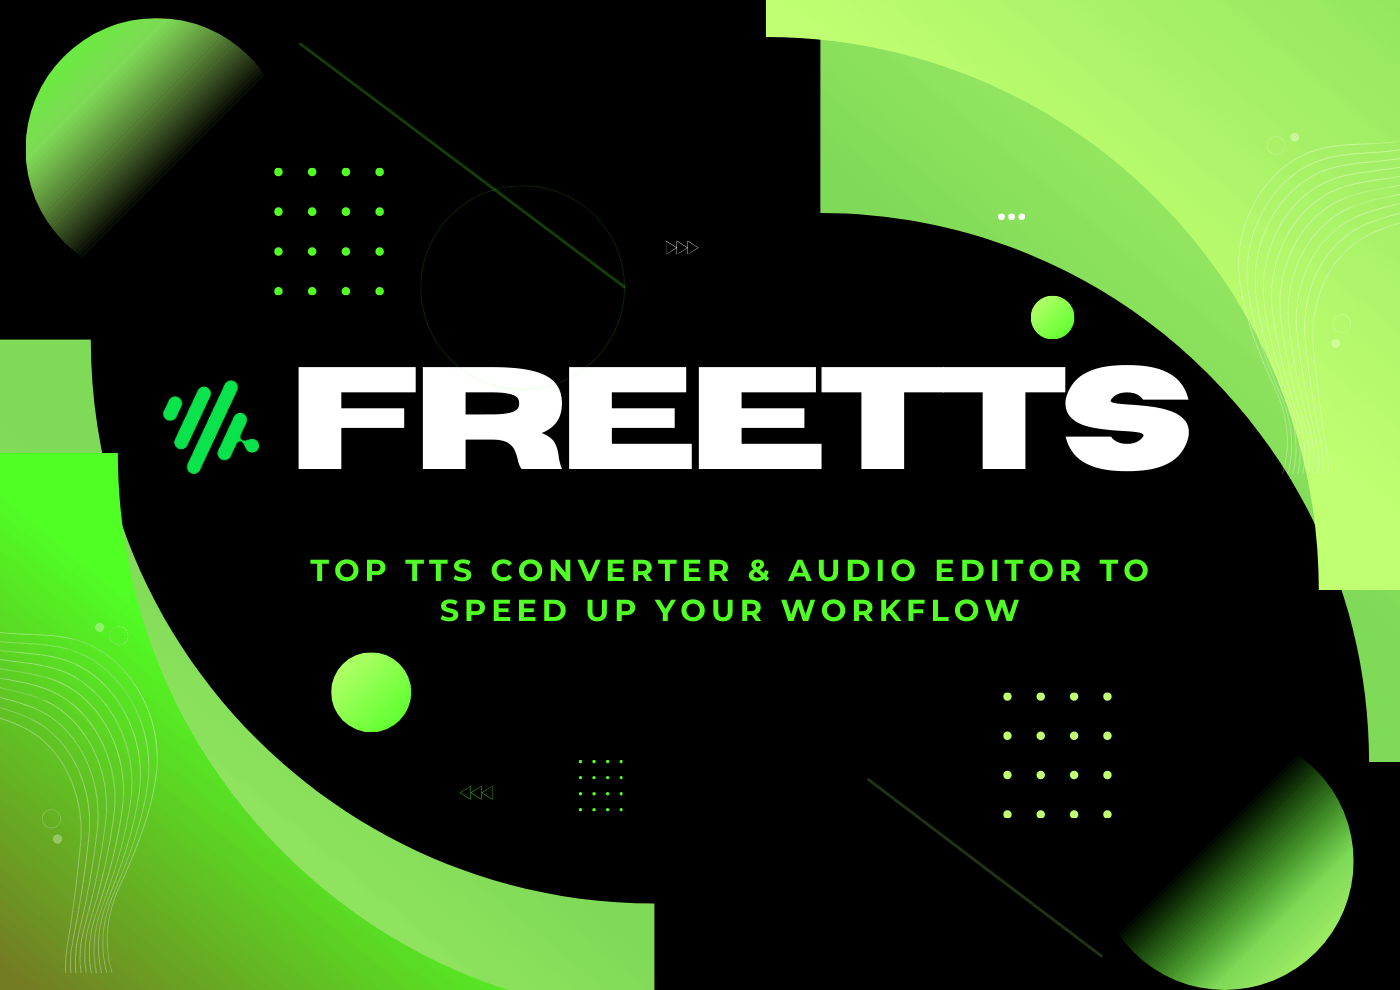 Let's Explore FreeTTS' Latest Update and New Features